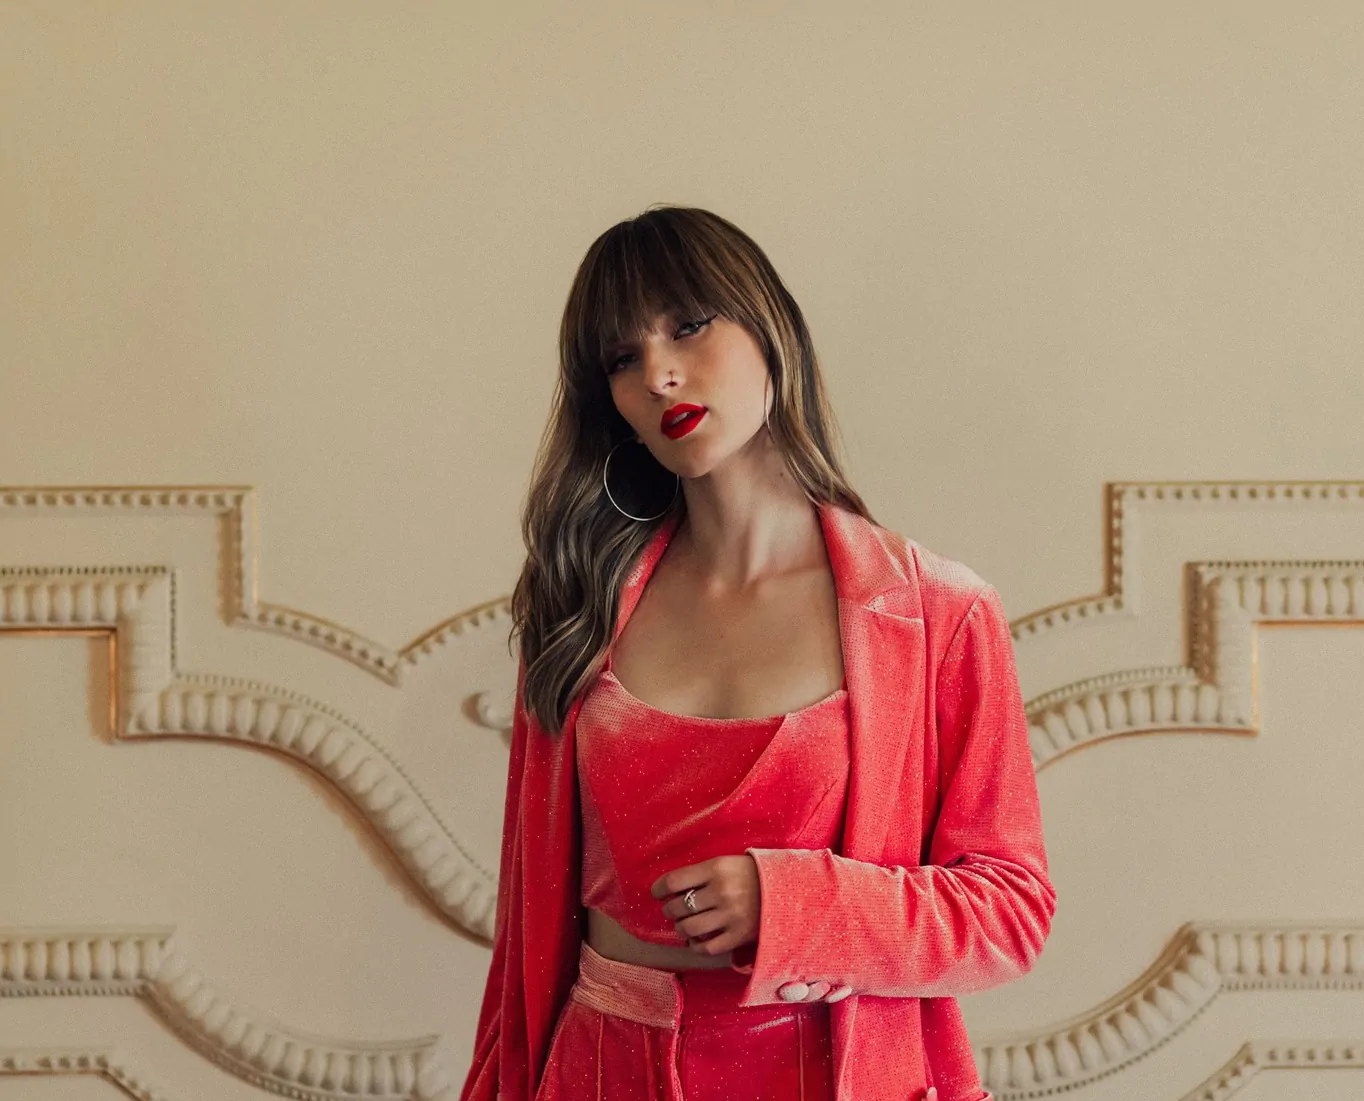 GRETTA RAY shares video for intoxicating new single ‘Passion’ – Watch Now!